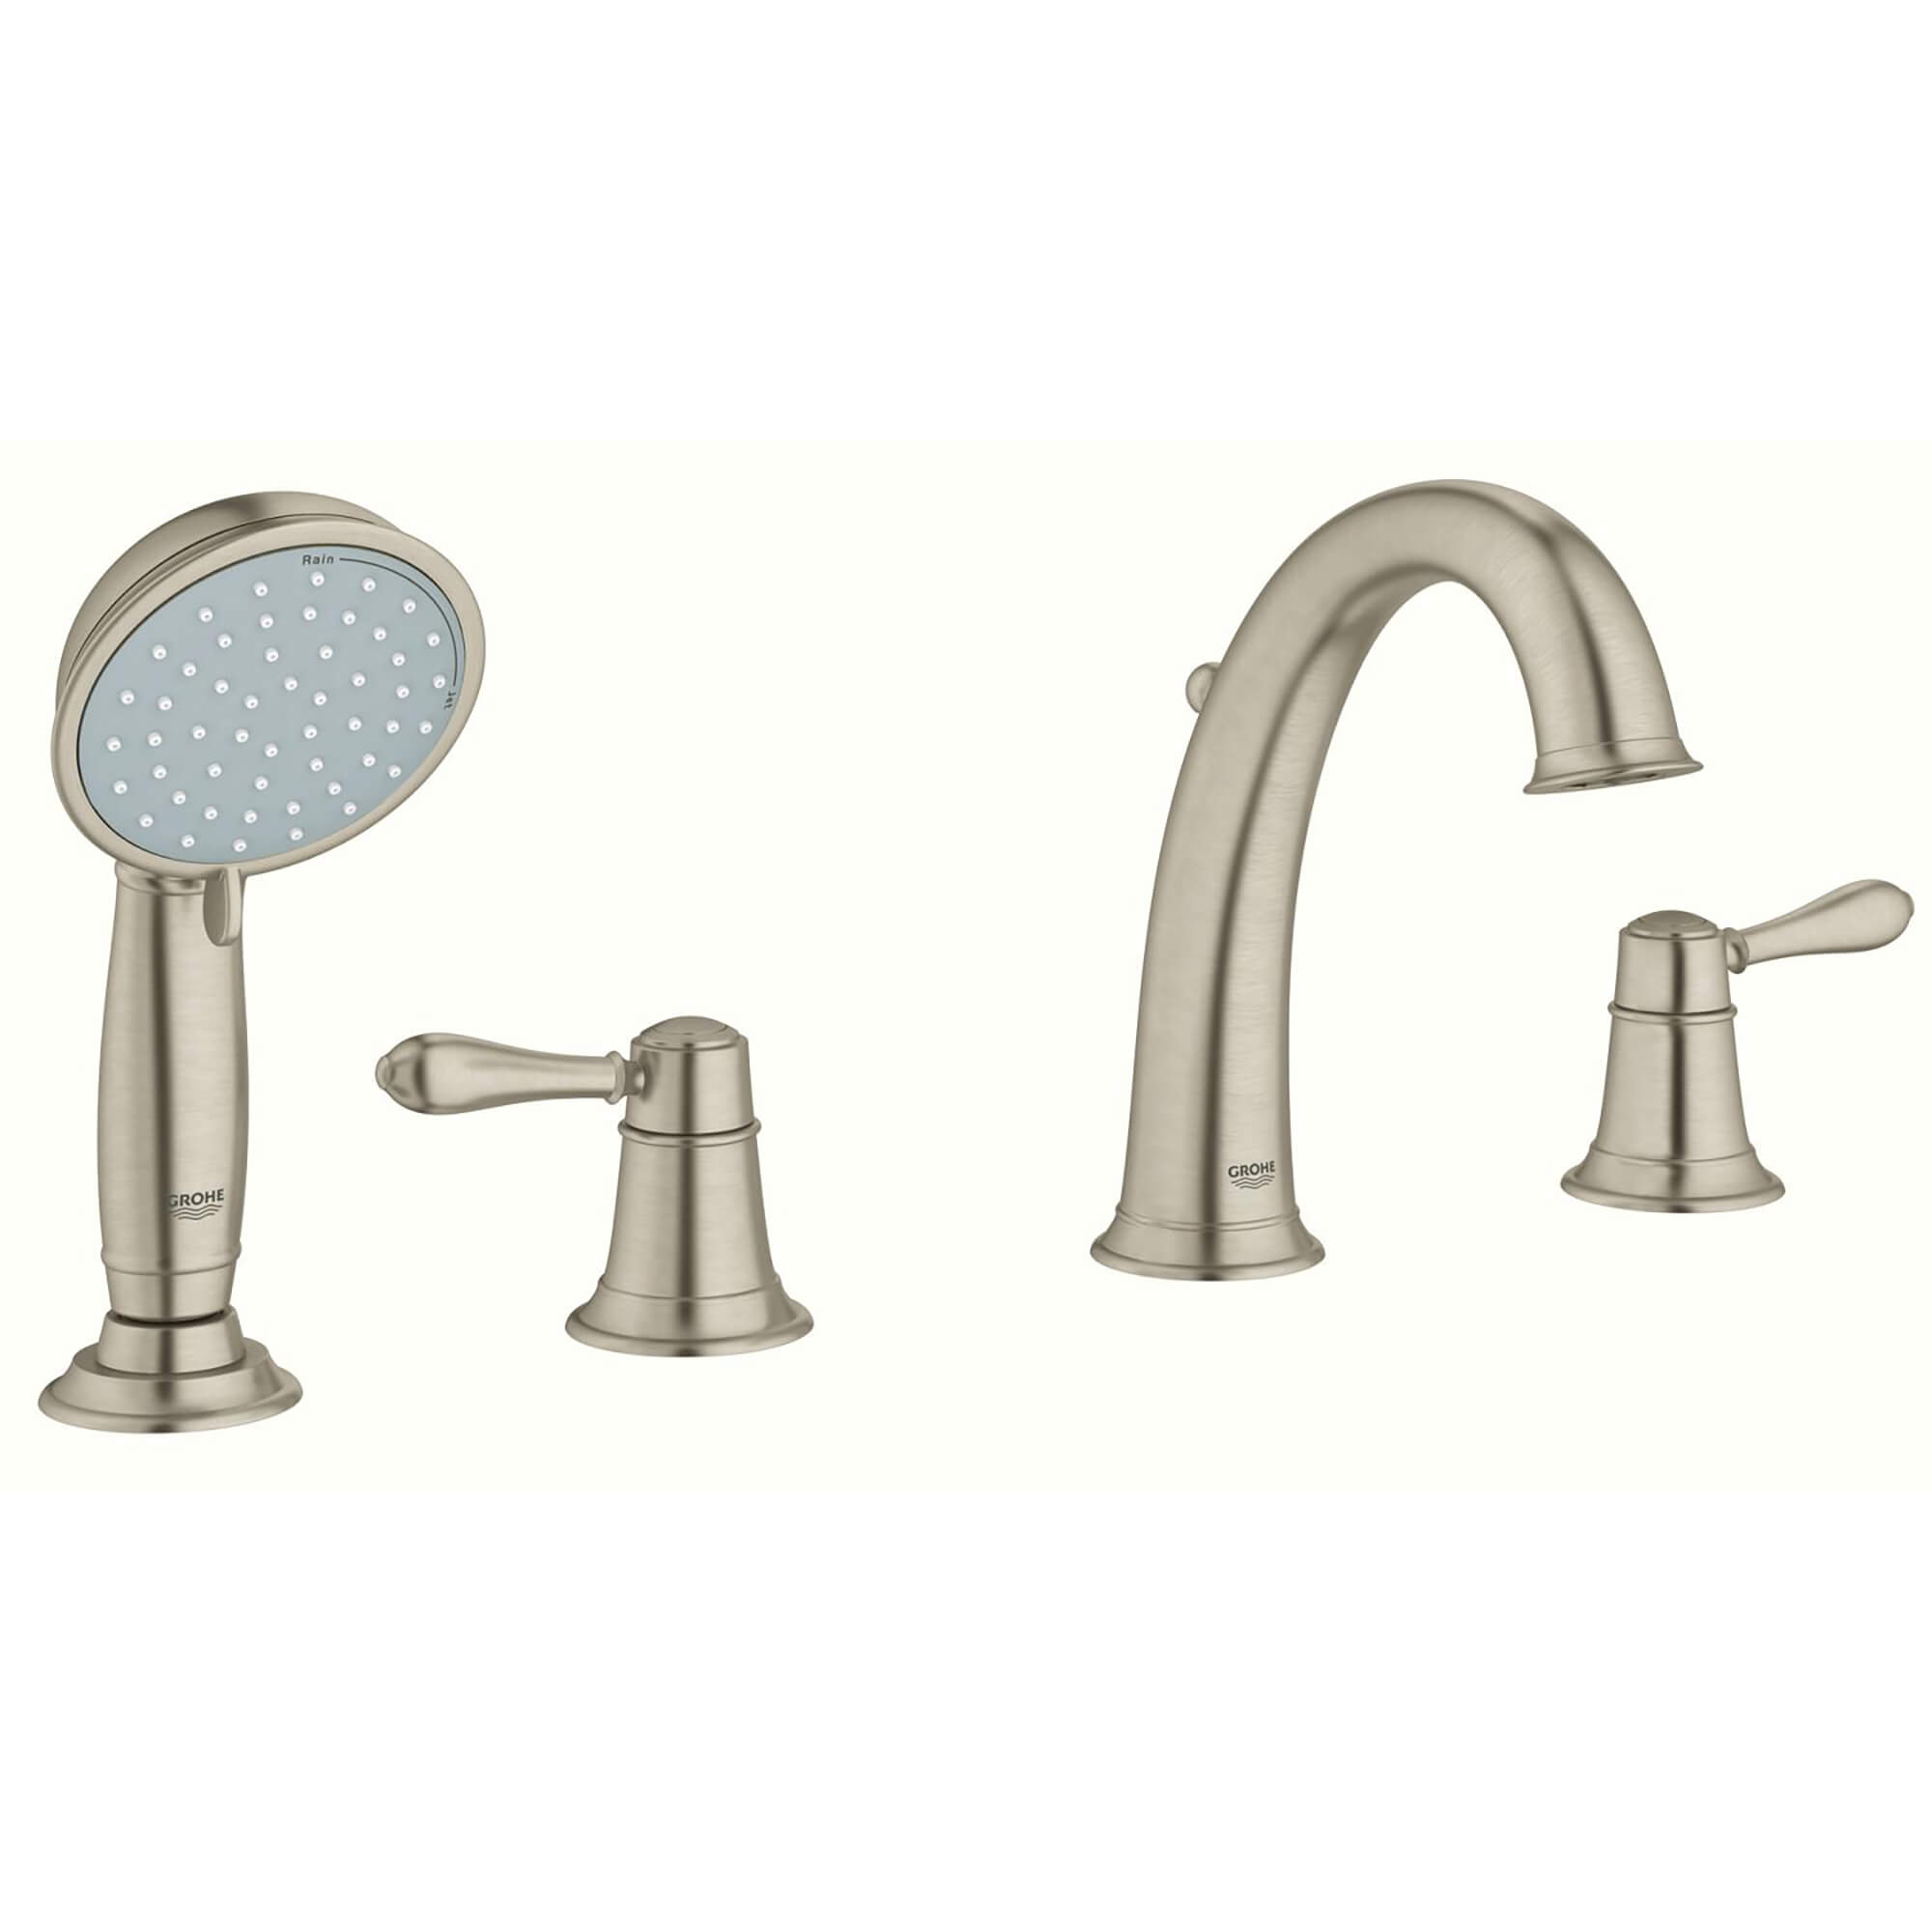 4-Hole 2-Handle Deck Mount Roman Tub Faucet with 7.6 L/min (2.0 gpm) Hand Shower